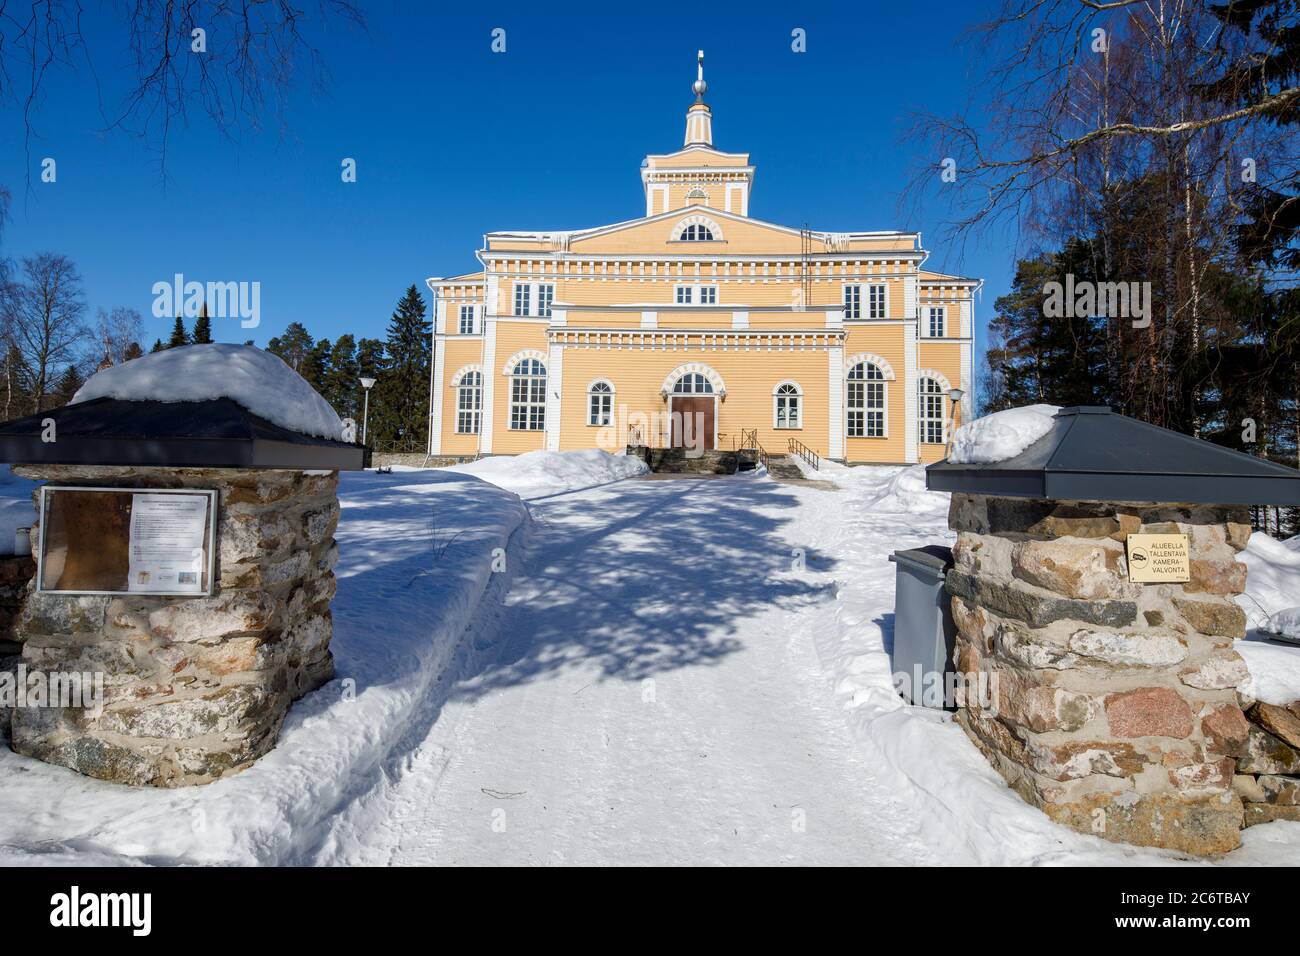 Large wooden Lutheran church at Rautalampi , built in the year 1844 and designed by the architect C . A Engel , Finland Stock Photo